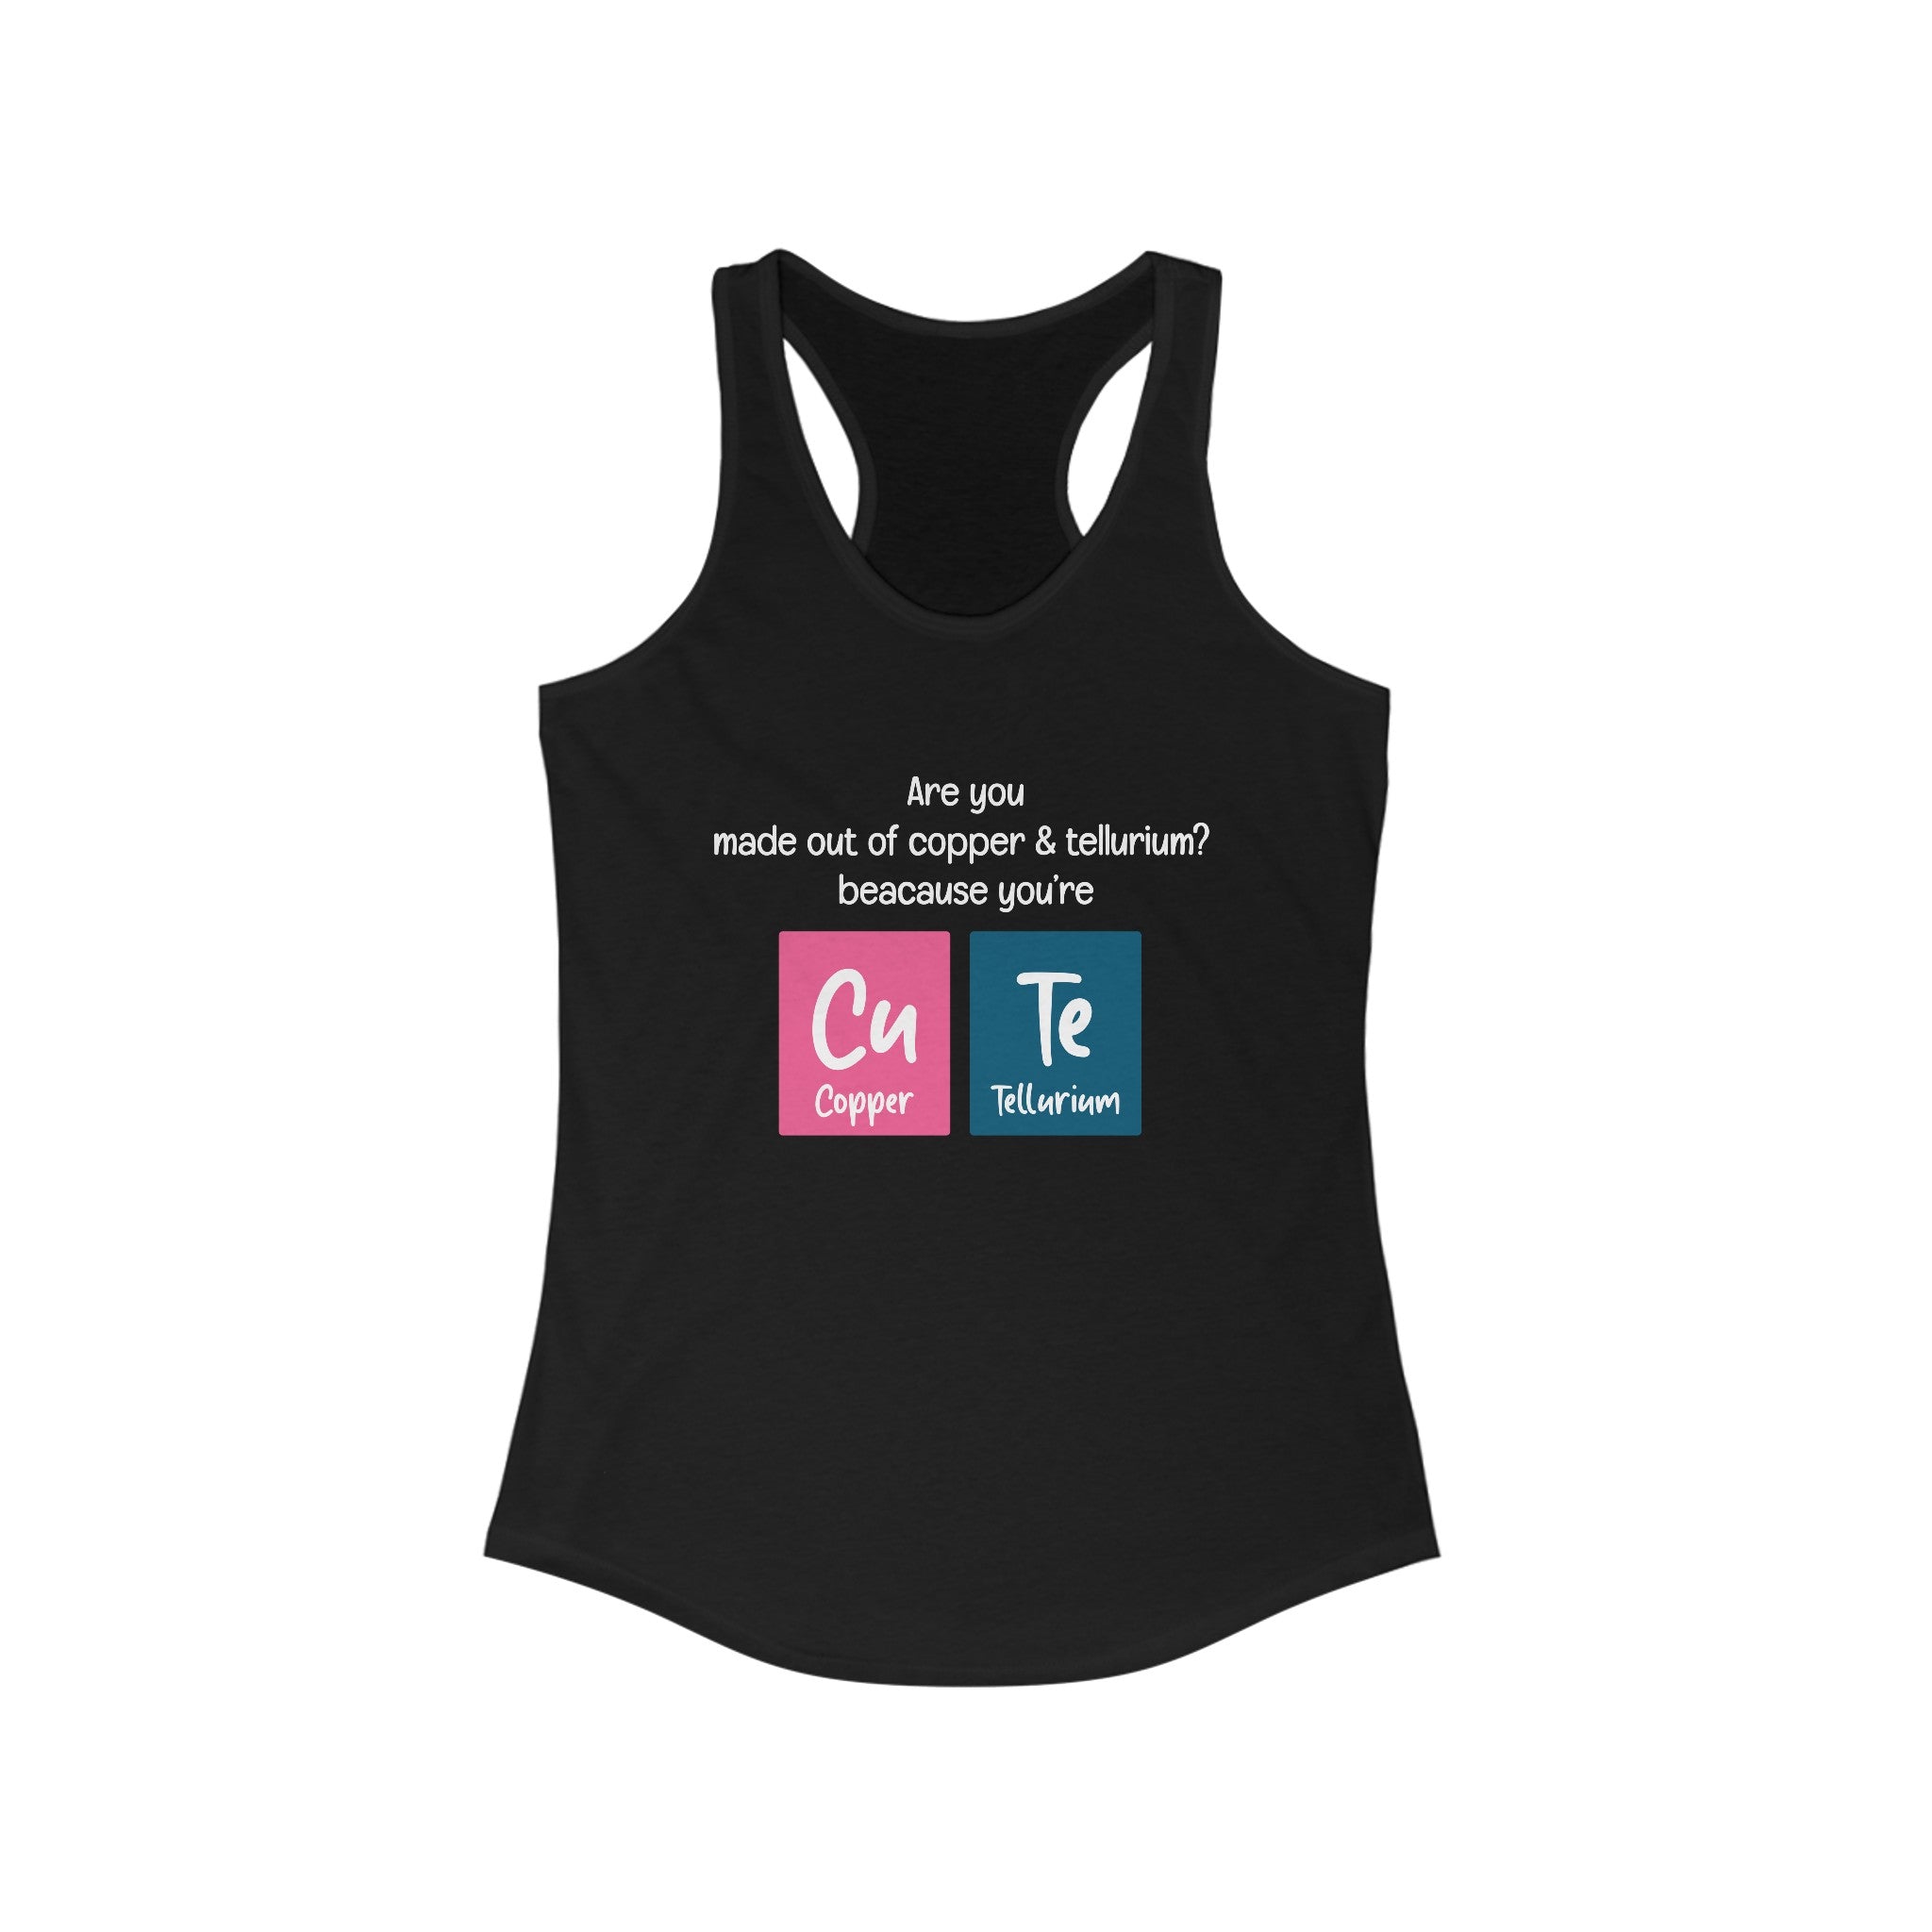 Cu-Te - Women's Racerback Tank with cute designs featuring the text "Are you made out of copper & tellurium? because you're Cu Te," alongside periodic table elements for copper (Cu) and tellurium (Te). Perfect for an active lifestyle.